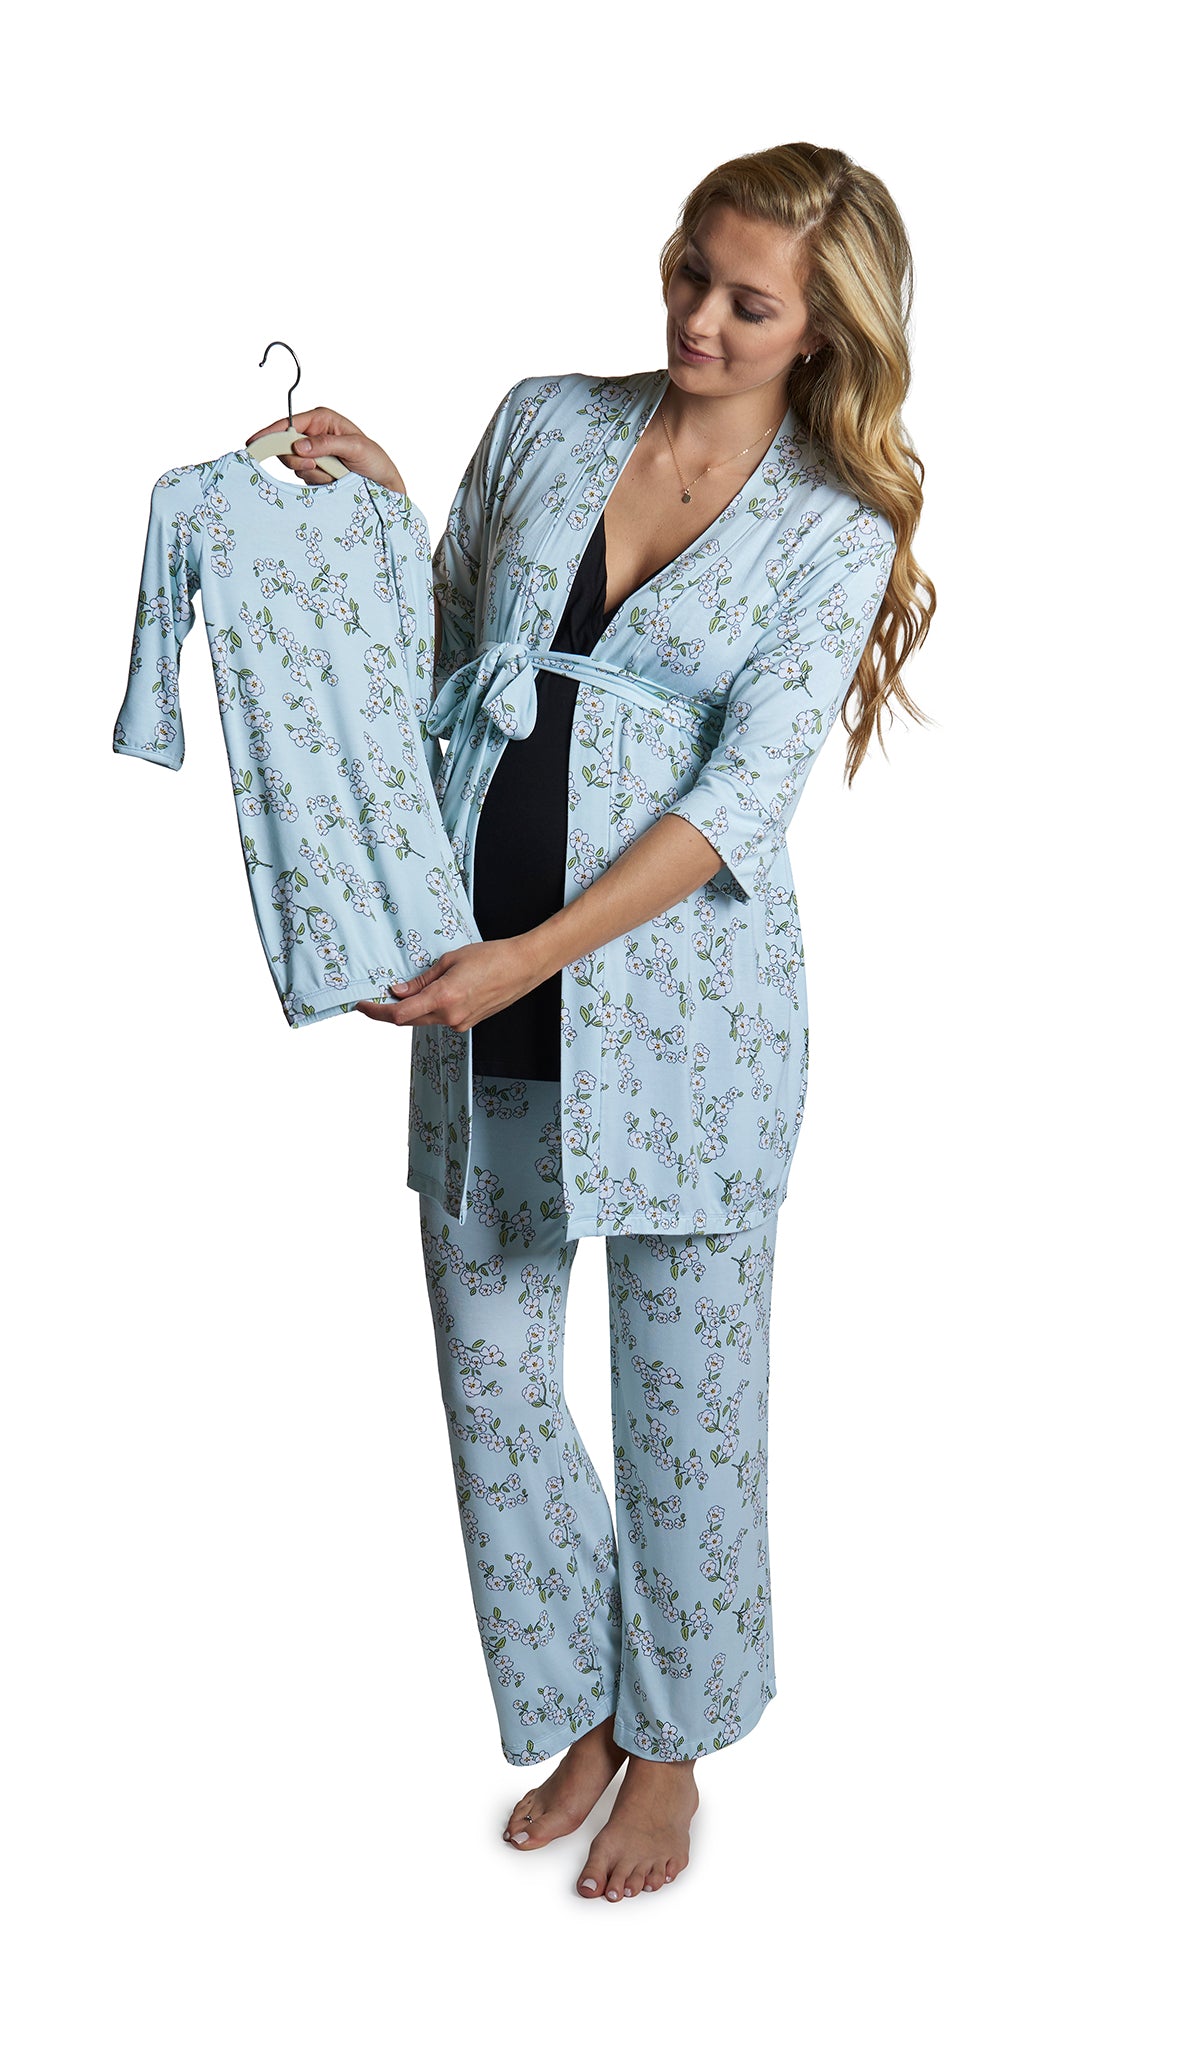 Baby's Breath Analise 5-Piece Set. Pregnant woman wearing 3/4 sleeve robe, tank top and pant while holding a baby gown.